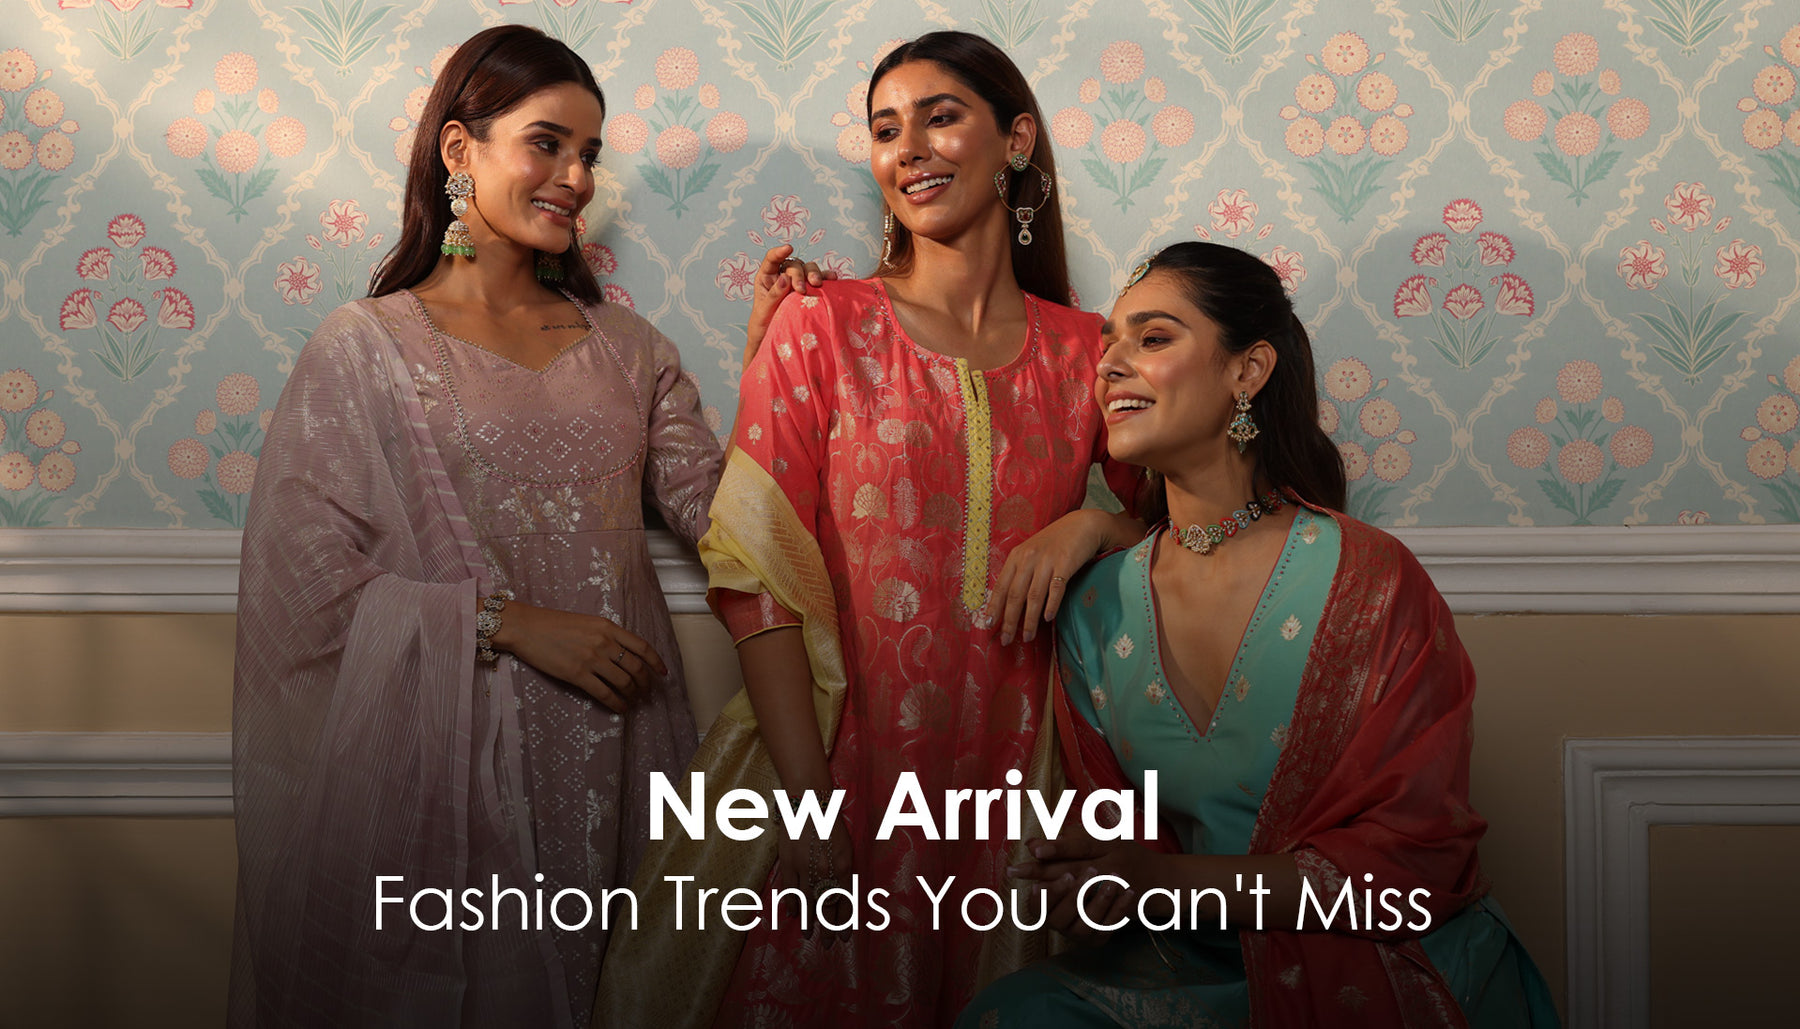 New Arrival Fashion Trends You Can't Miss